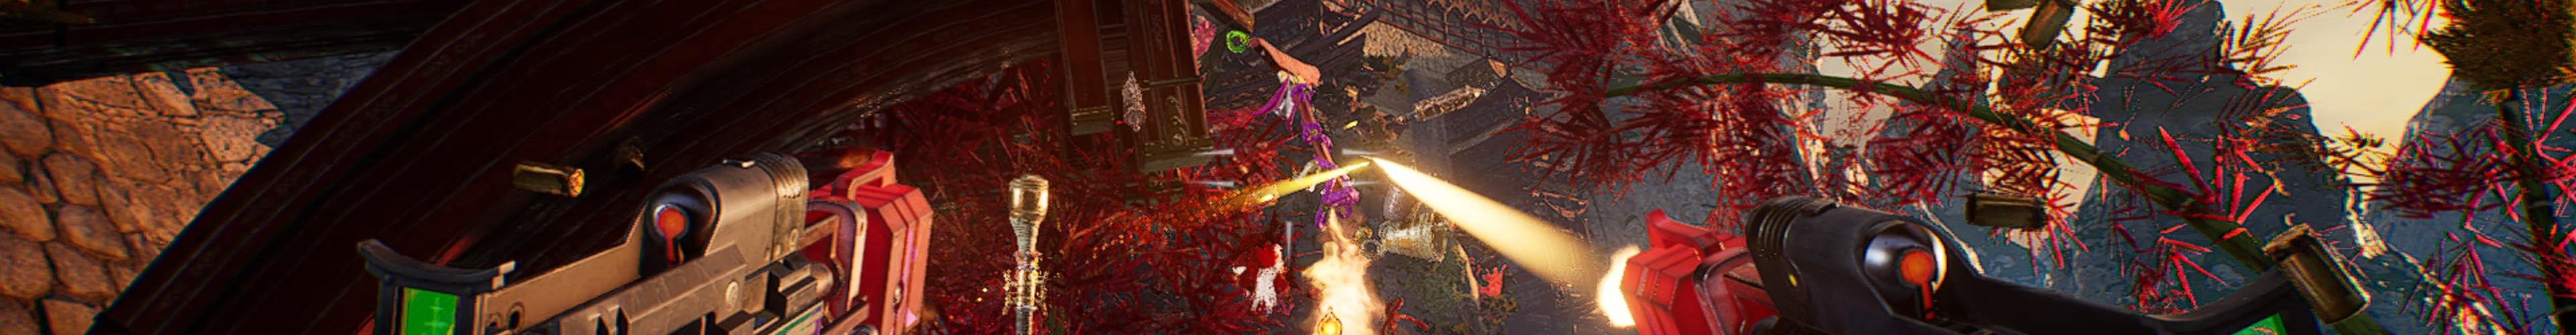 Shadow Warrior 3 PS4 Review: A Poor Console Port Marred by Issues